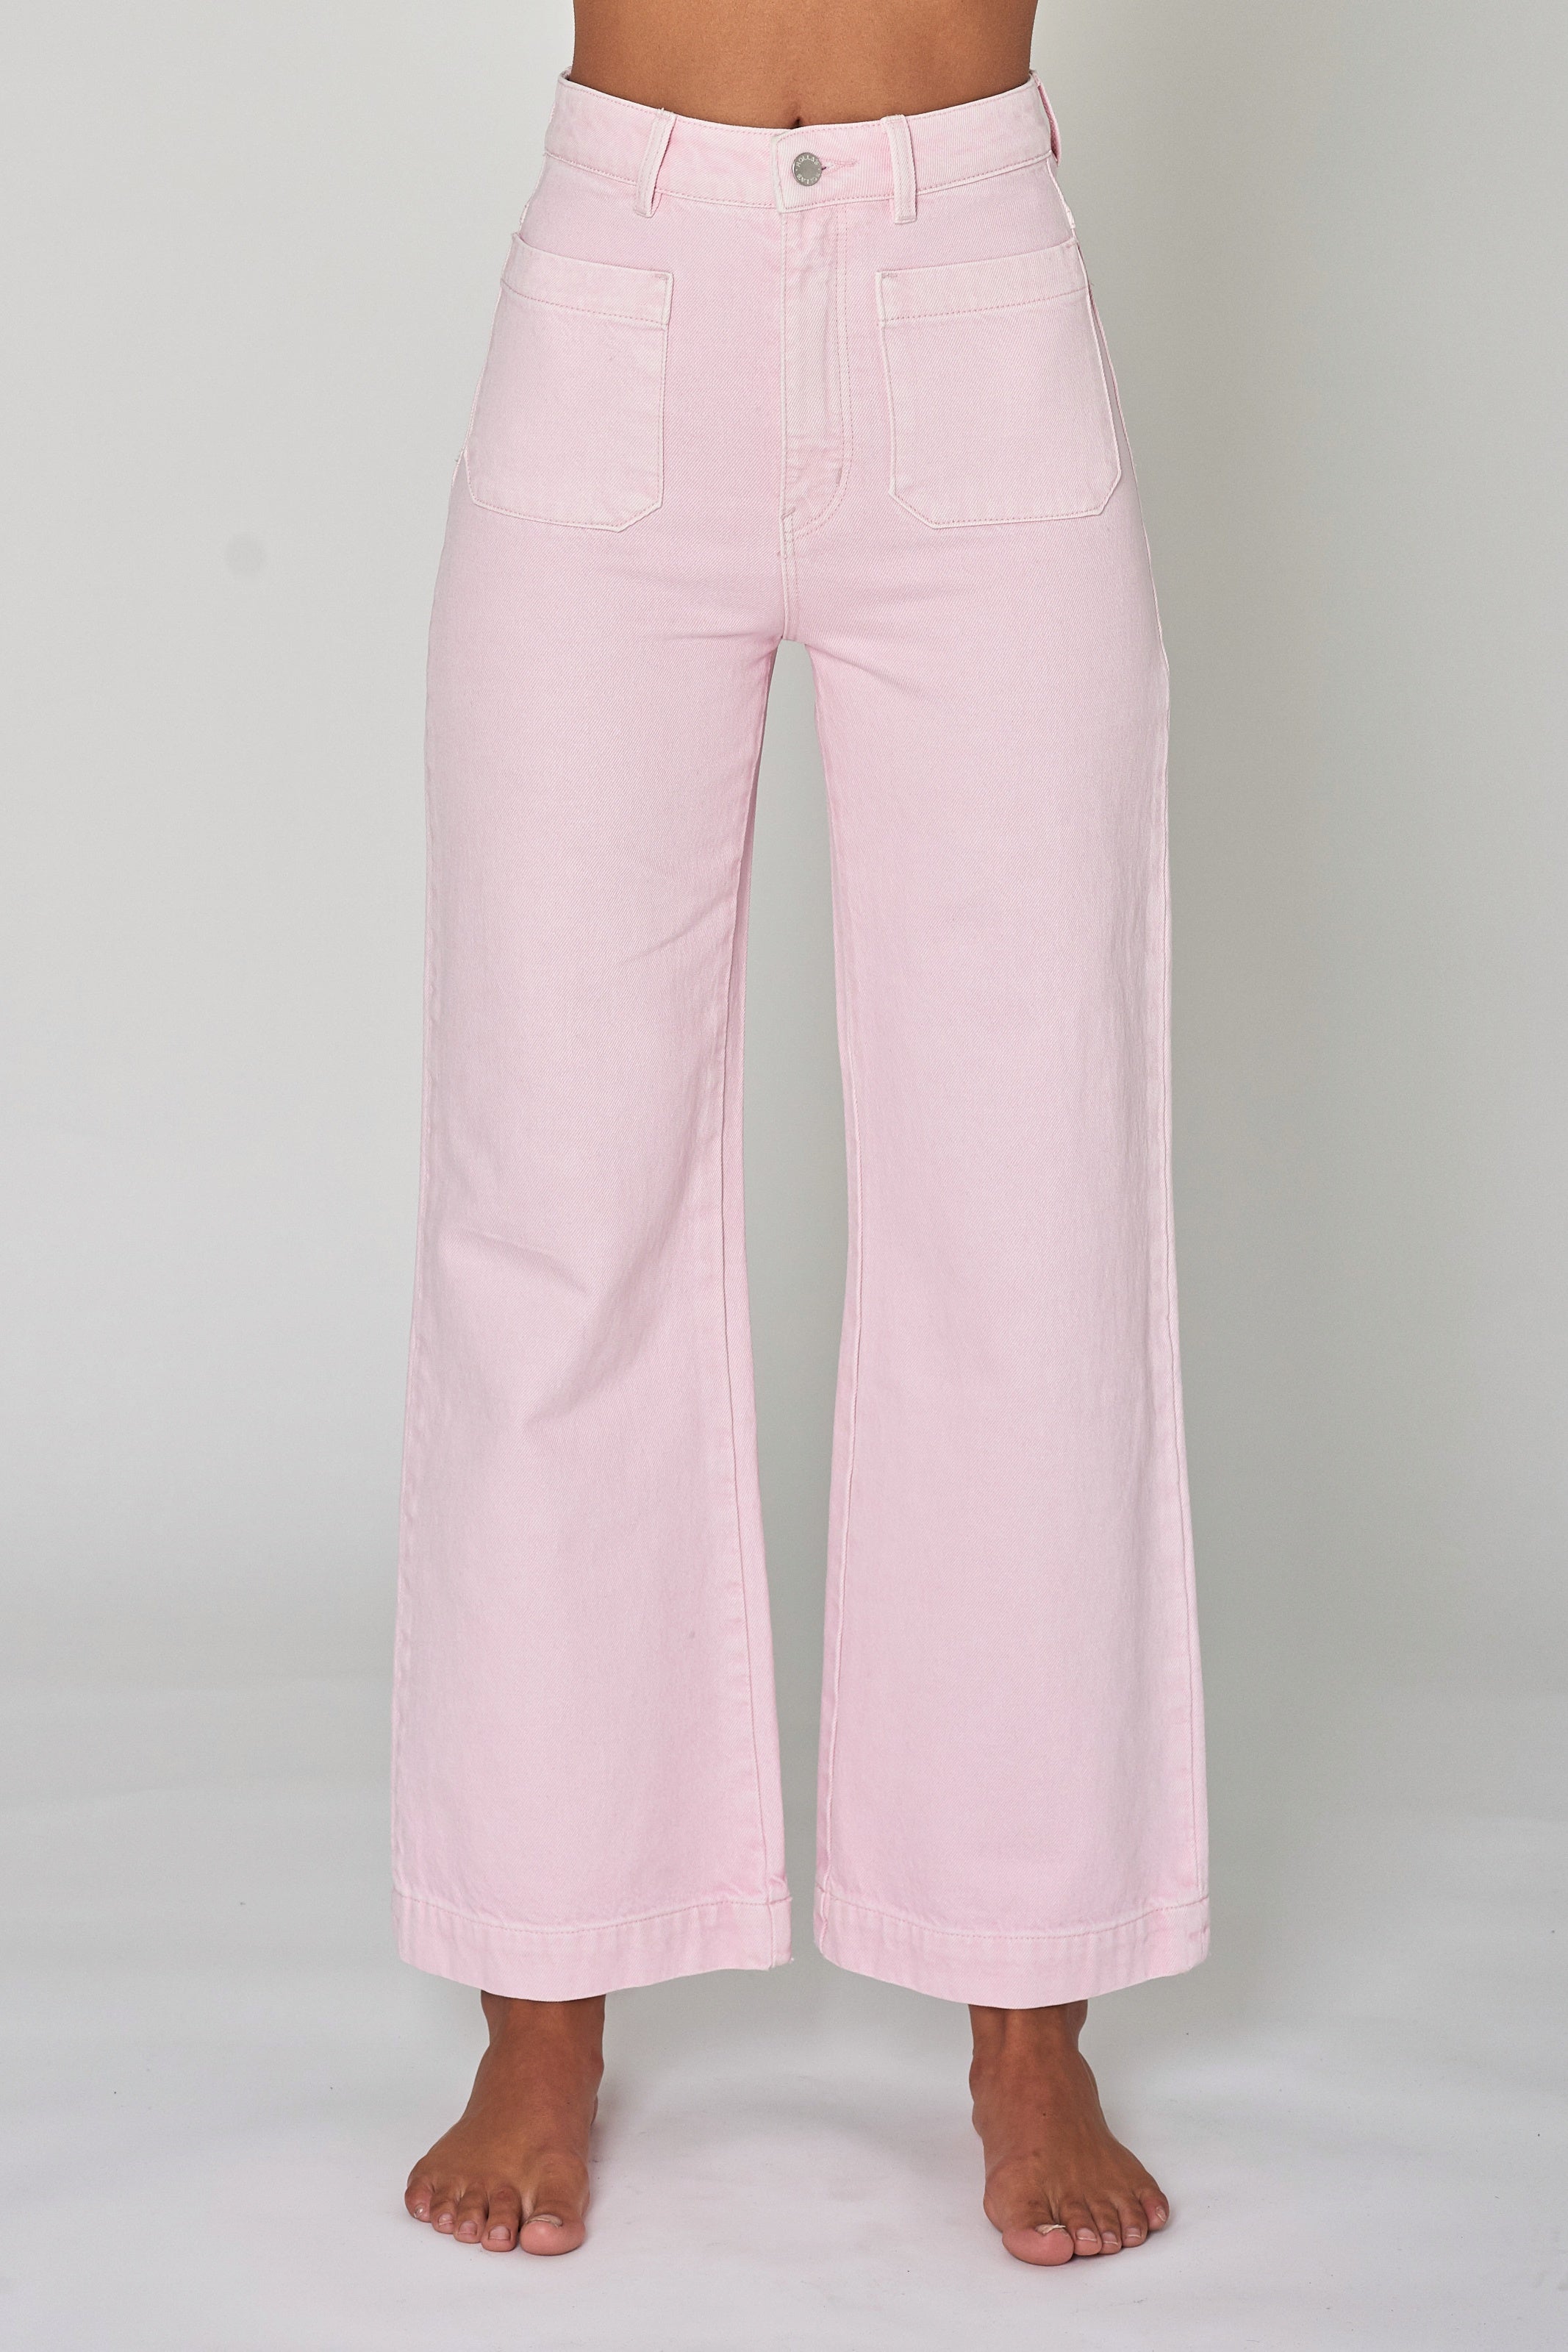 ROLLAS Womens Sailor Jean - 90's Pink